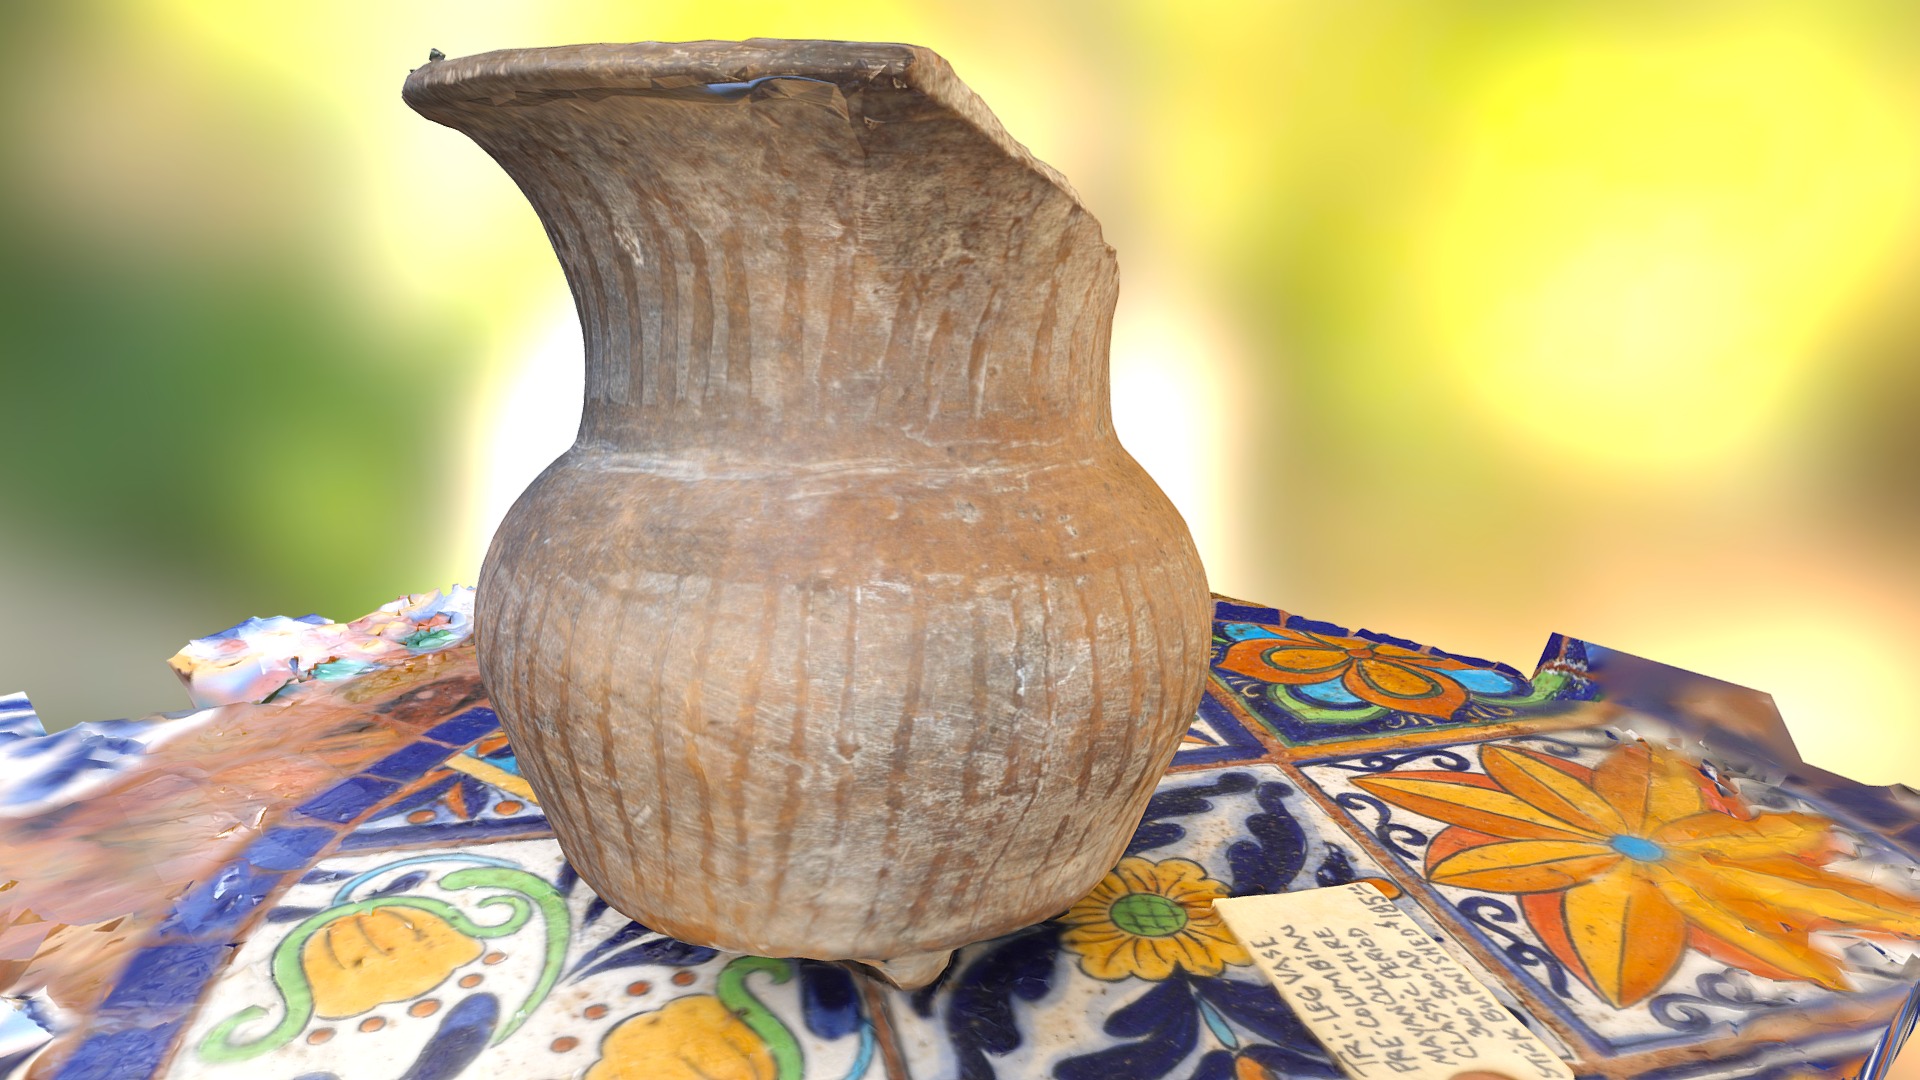 3D model Precolumbian Vase - This is a 3D model of the Precolumbian Vase. The 3D model is about a vase on a table.